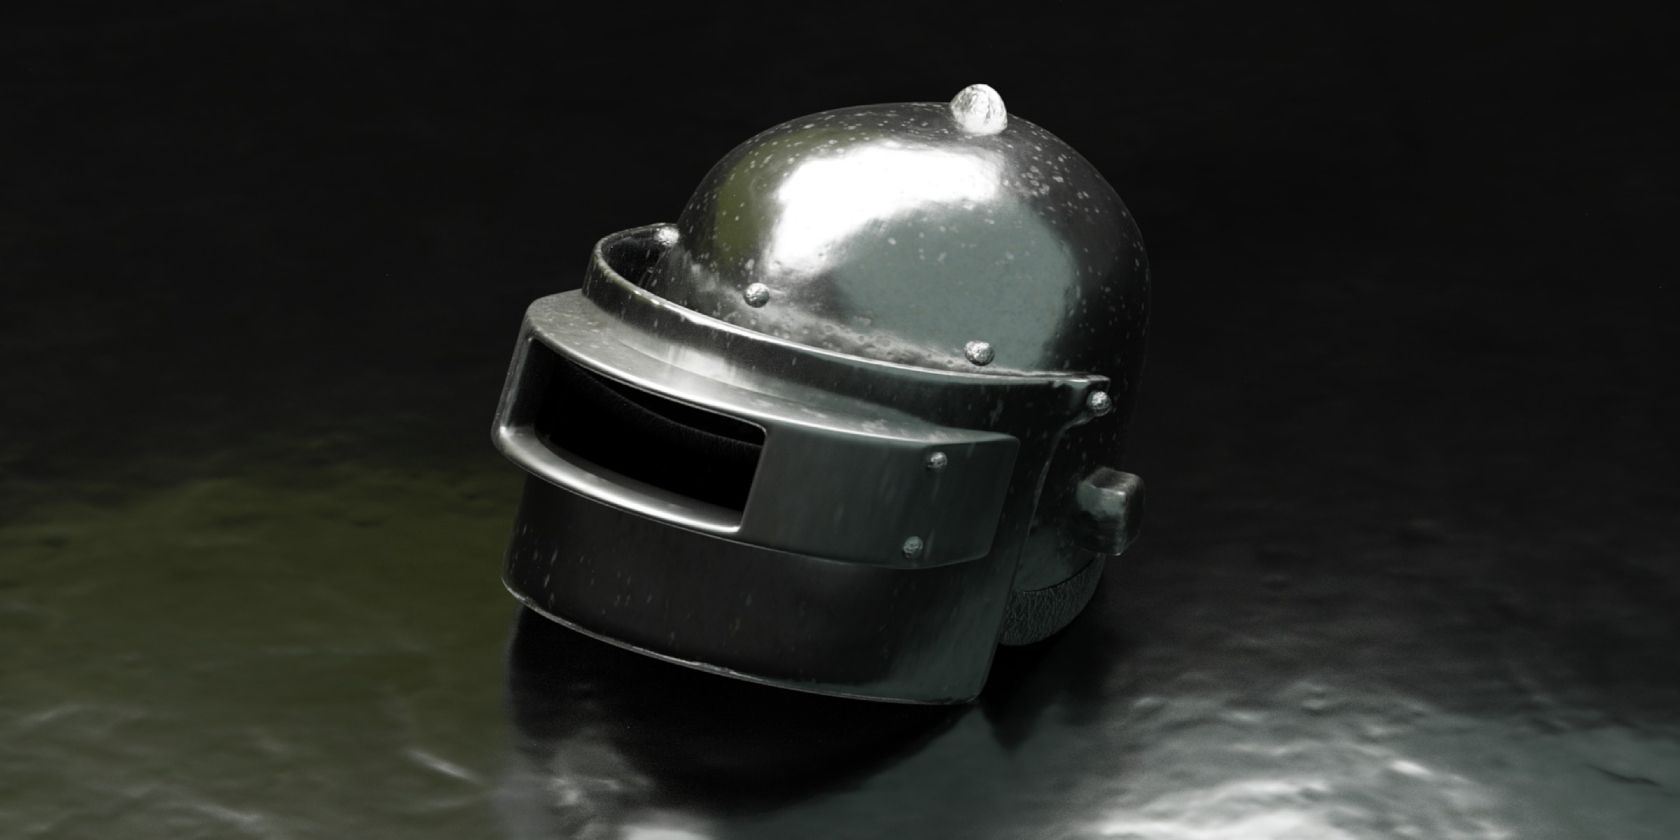 The prized Level 3 Helmet in PUBG known as Spetsnaz